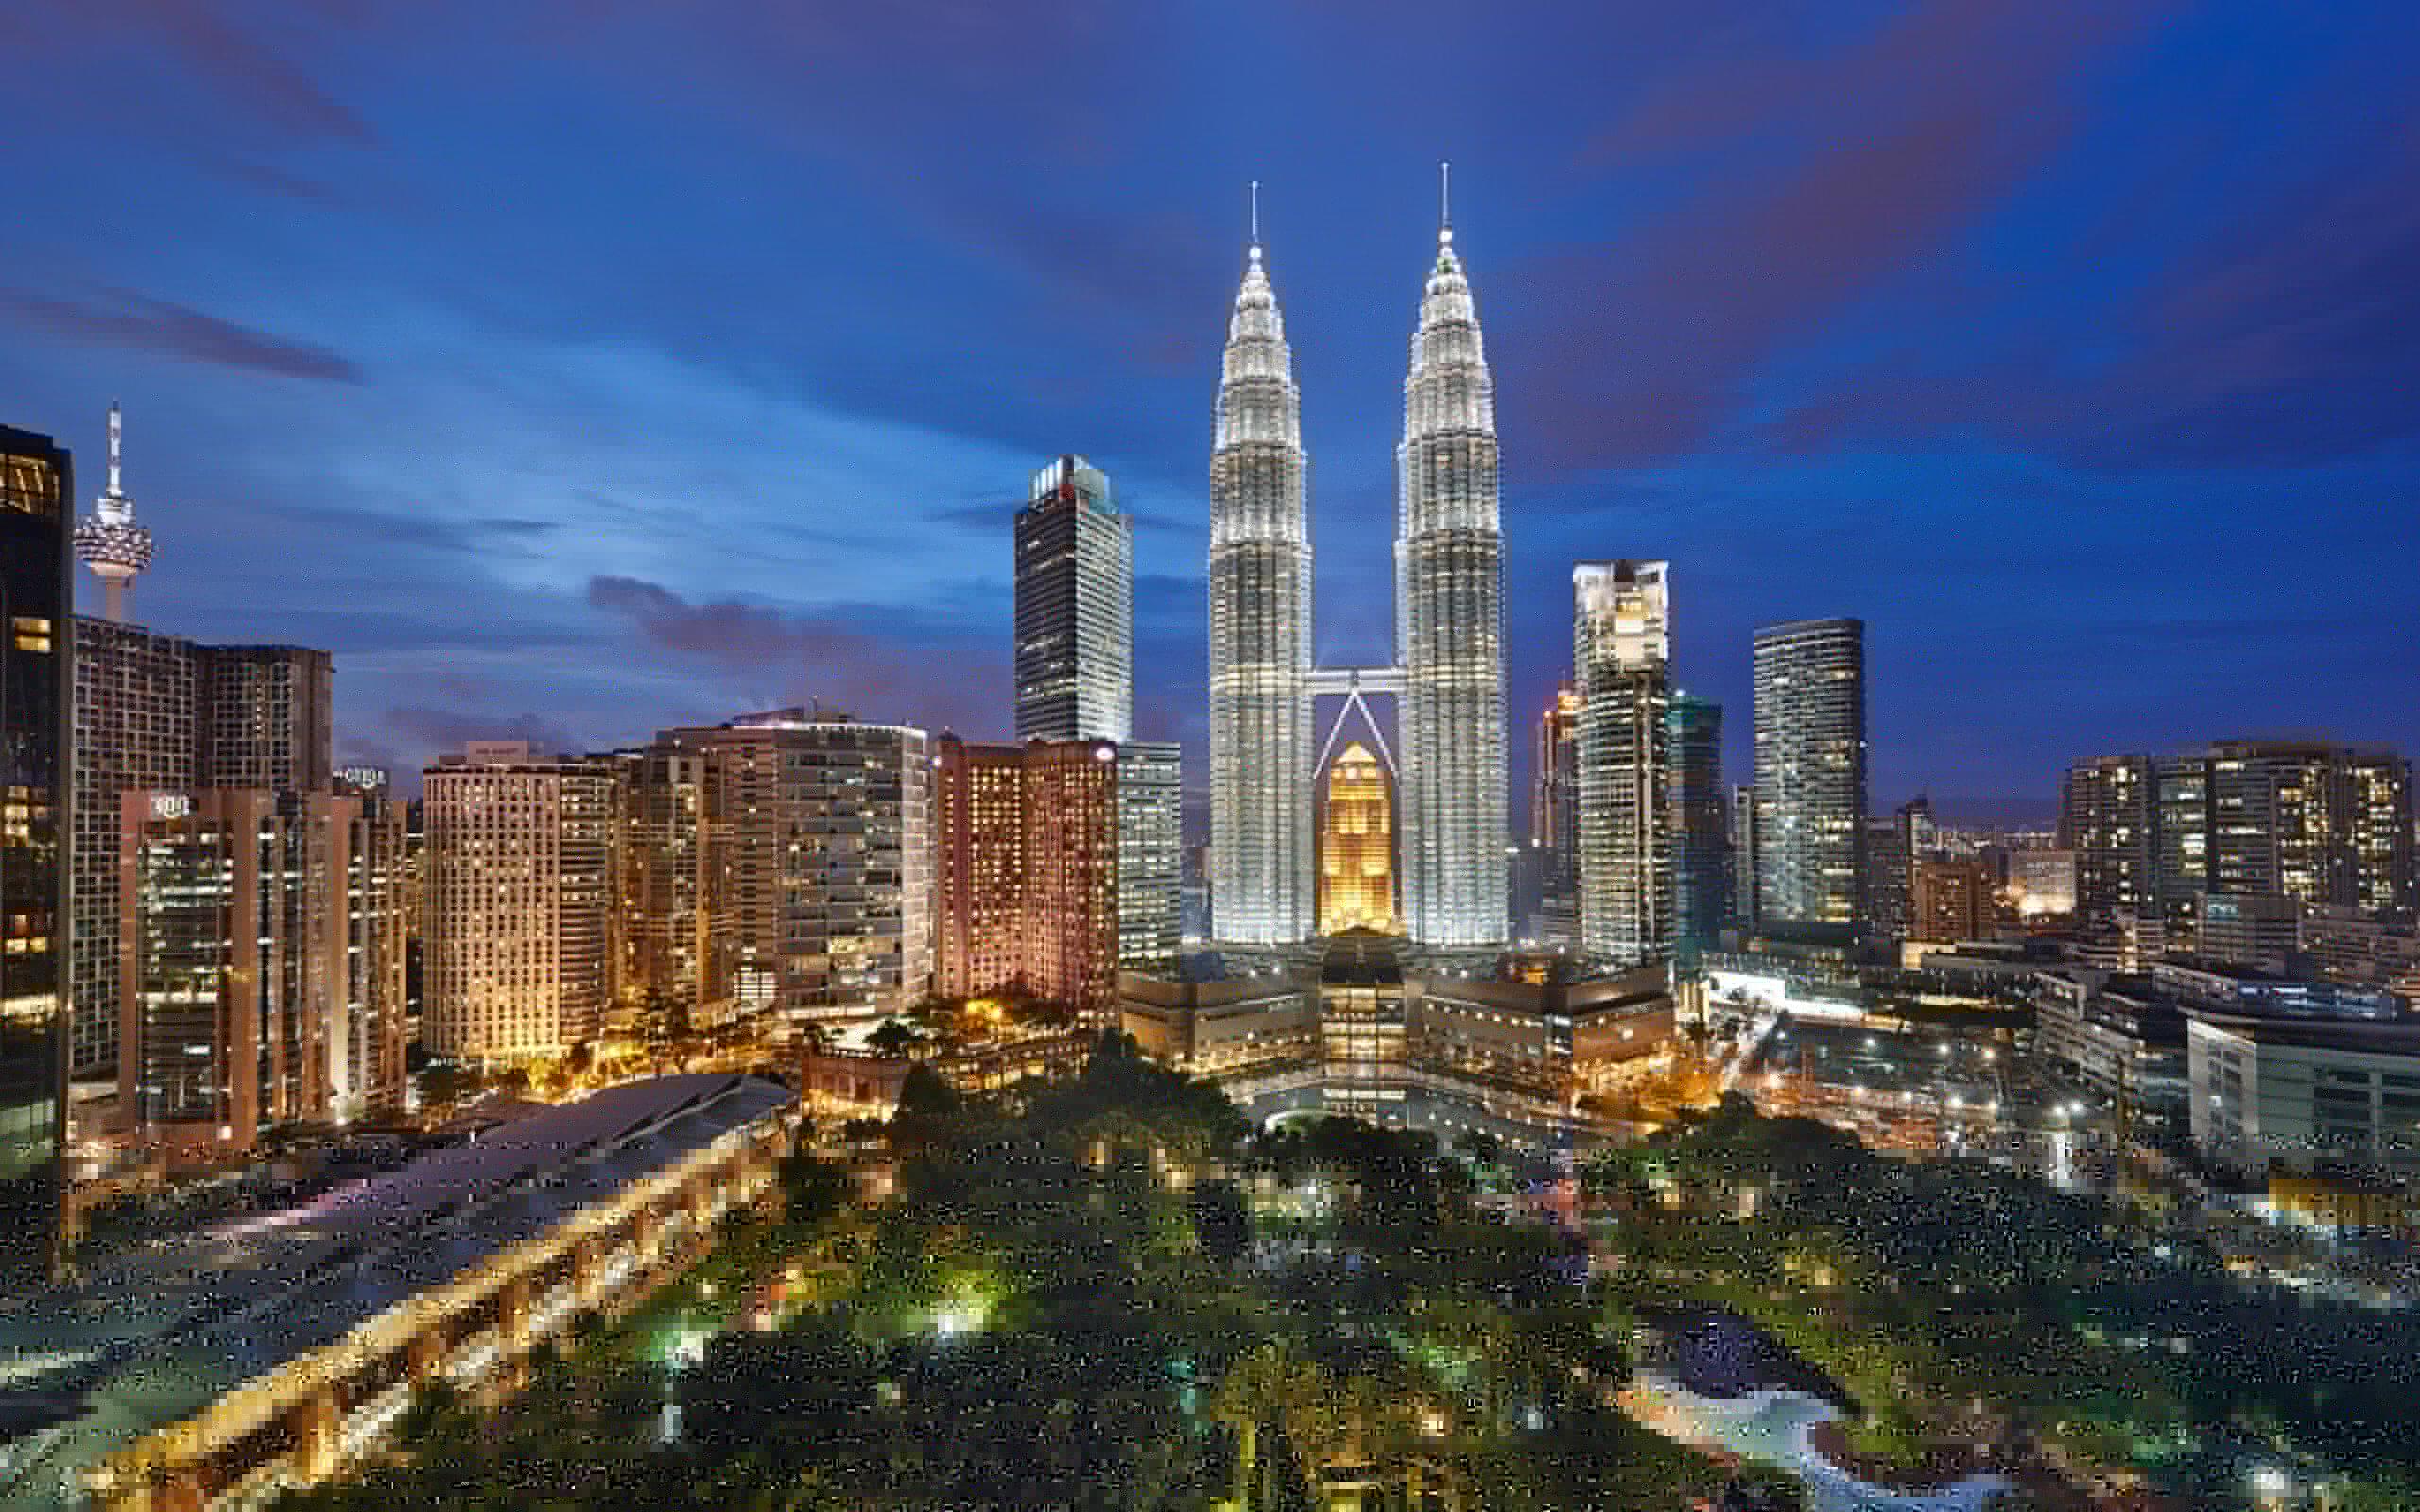 Malaysia 4K wallpapers for your desktop or mobile screen free and easy